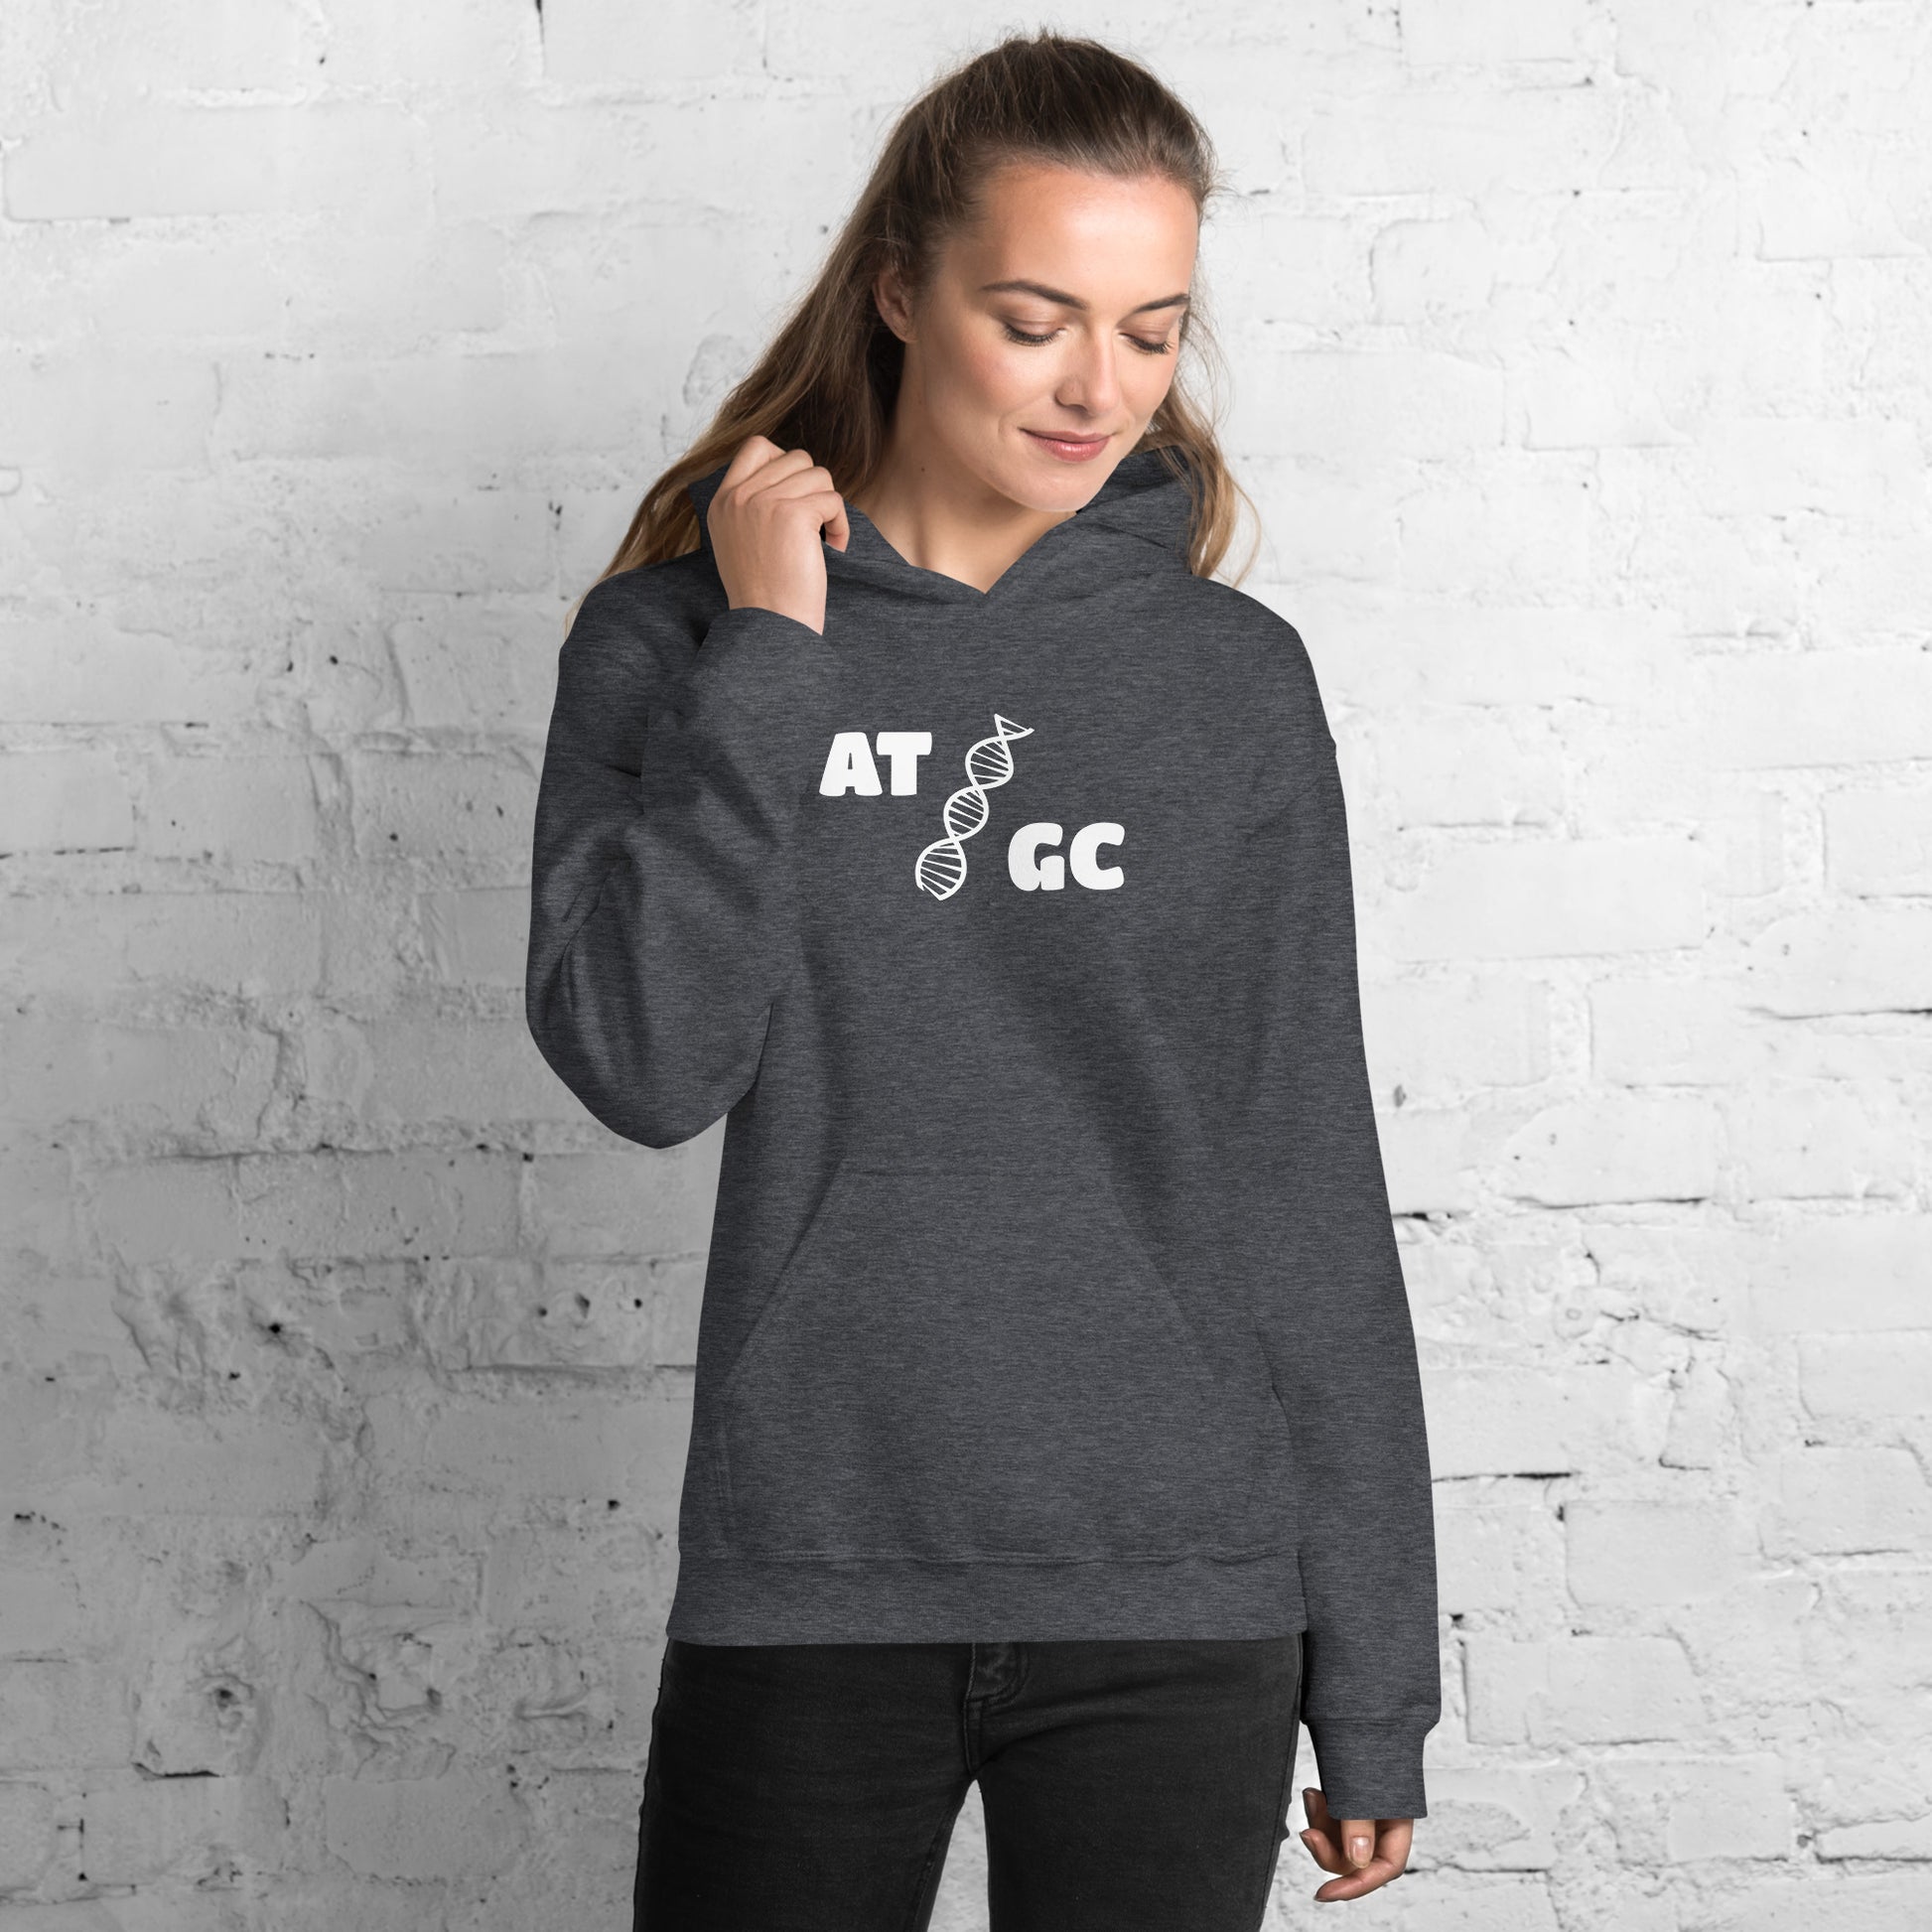 Women with dark grey hoodie with image of a DNA string and the text "ATGC"